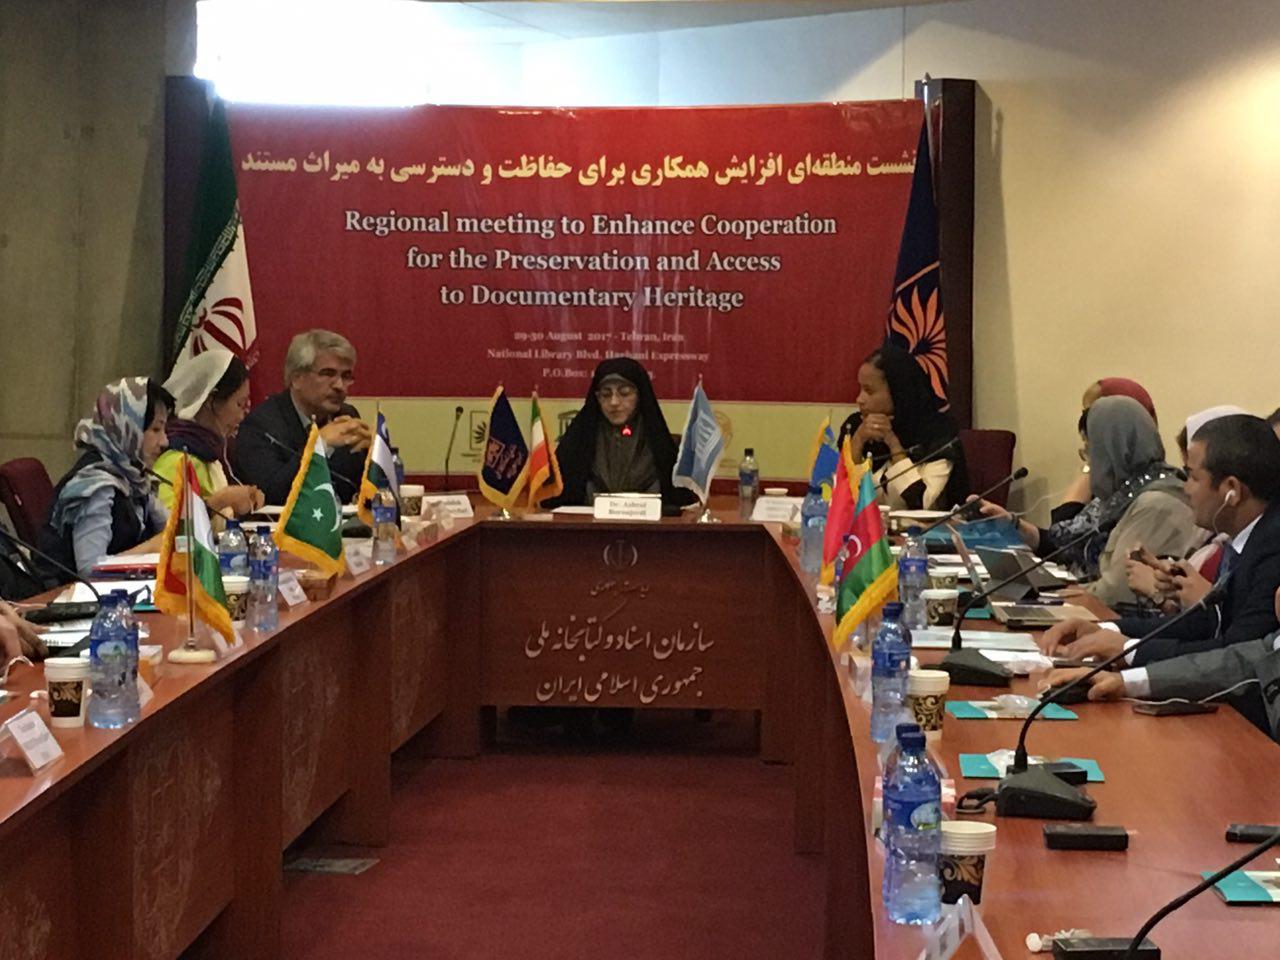 unesco-and-the-archives-and-national-library-of-iran-organize-regional-meeting-on-the-preservation-and-accessibility-of-documentary-heritage